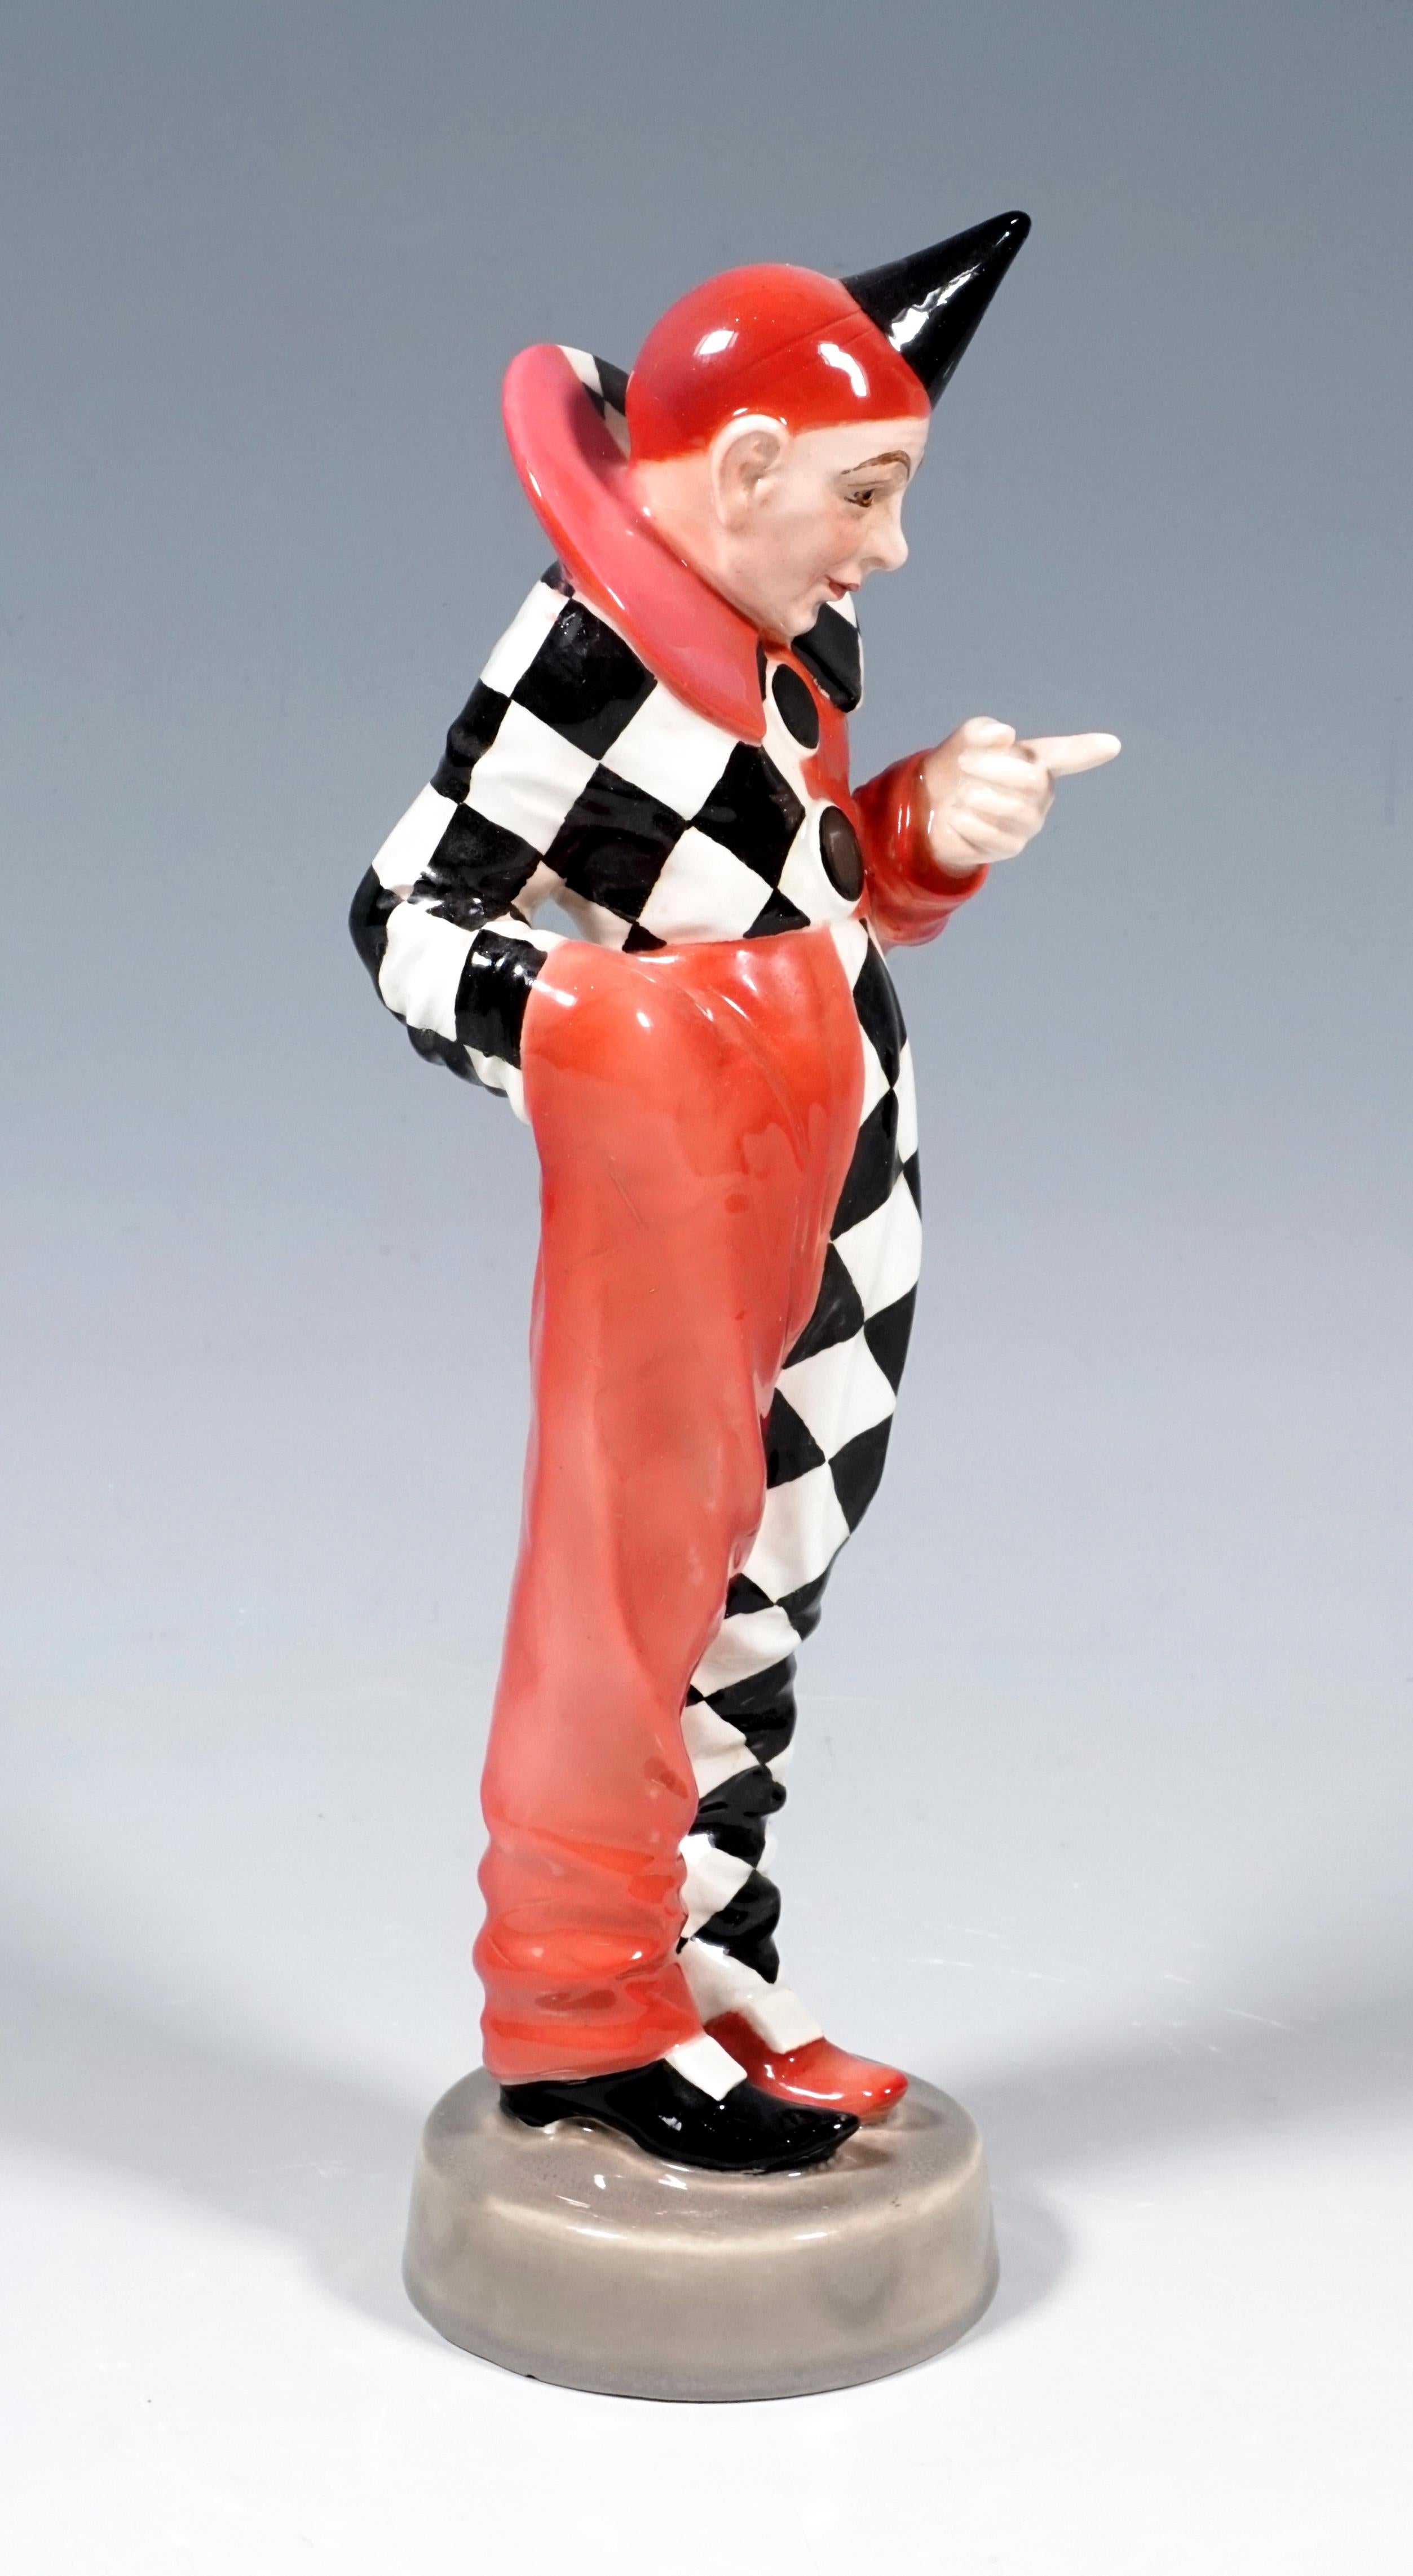 Very rare Goldscheider Art Deco ceramic figure of the 1920's:
Depiction of a standing Pierrot in a slightly bent position, his right hand in the pocket of his costume, which is put together in typical Harlequin fashion: monochrome rose-colored